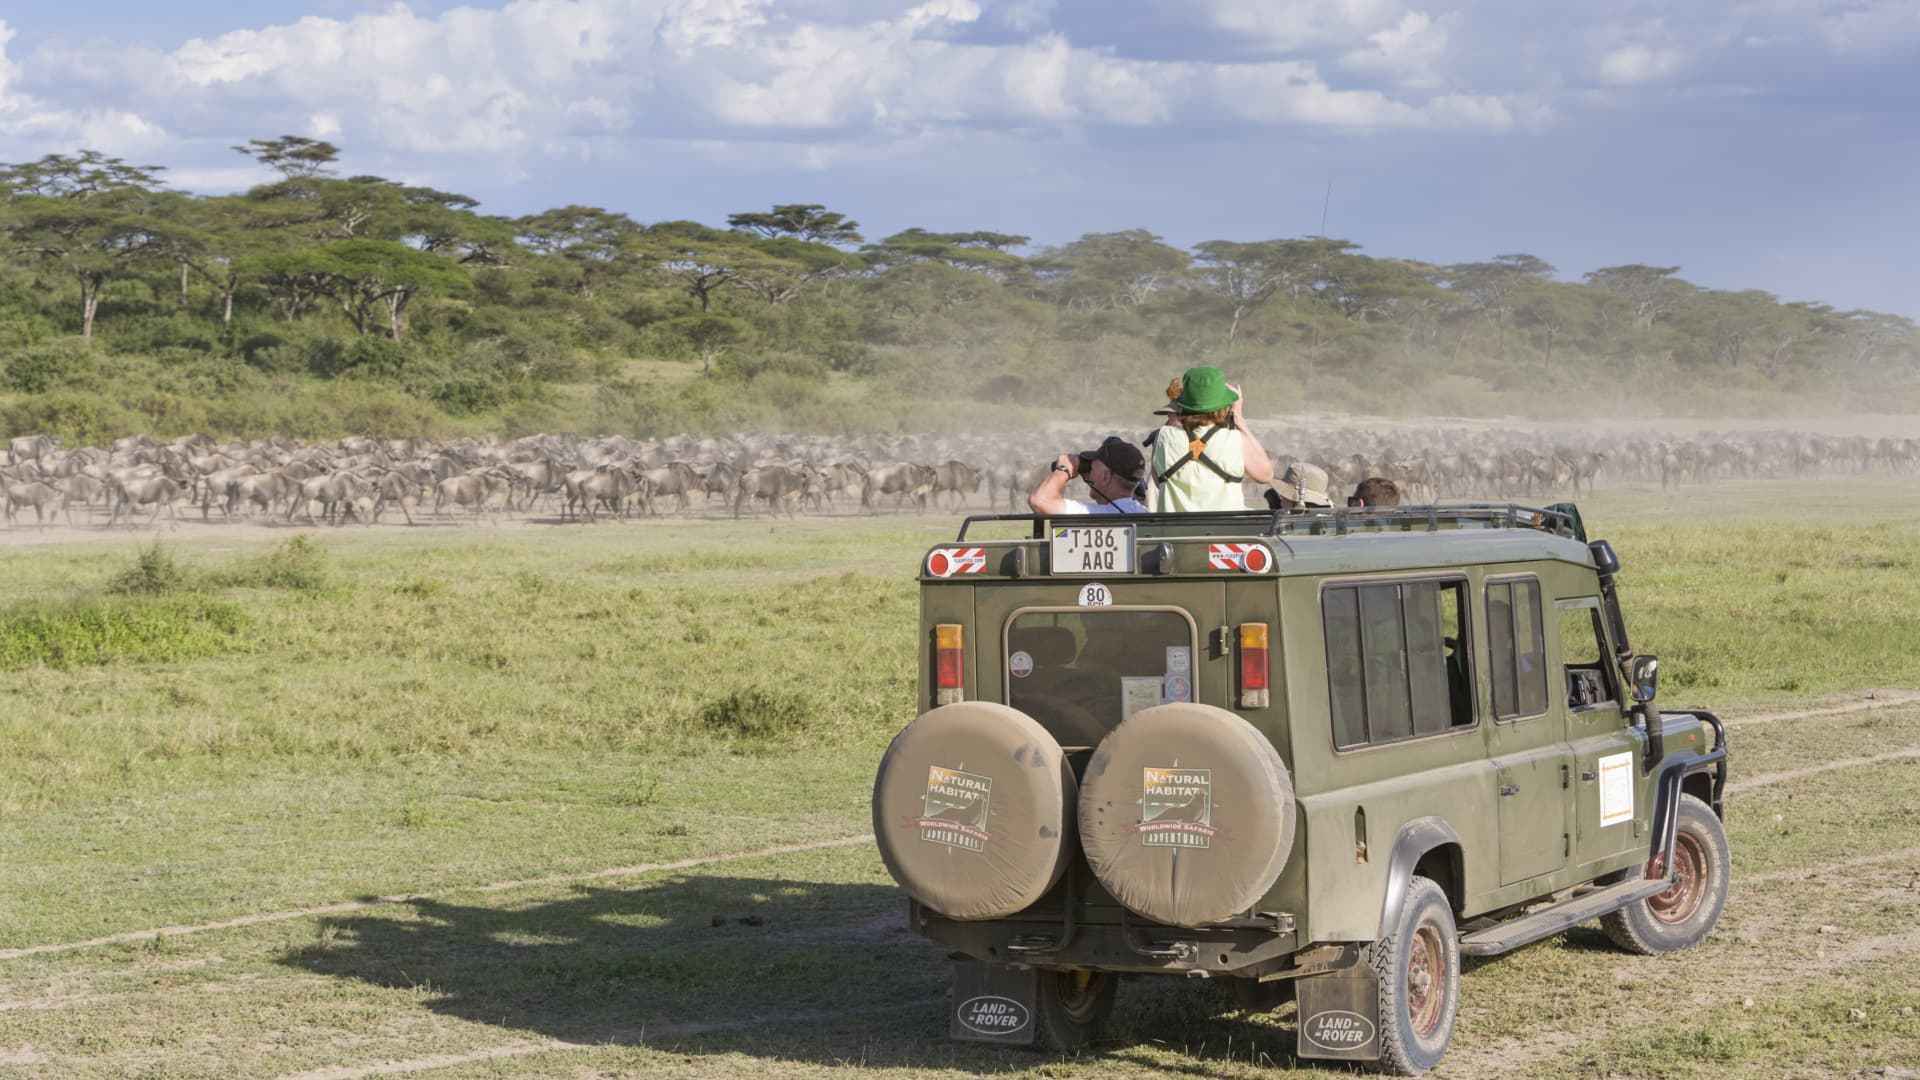 Tourists watch a herd of wildebeest from a land cruiser in the Serengeti National Park, Tanzania.